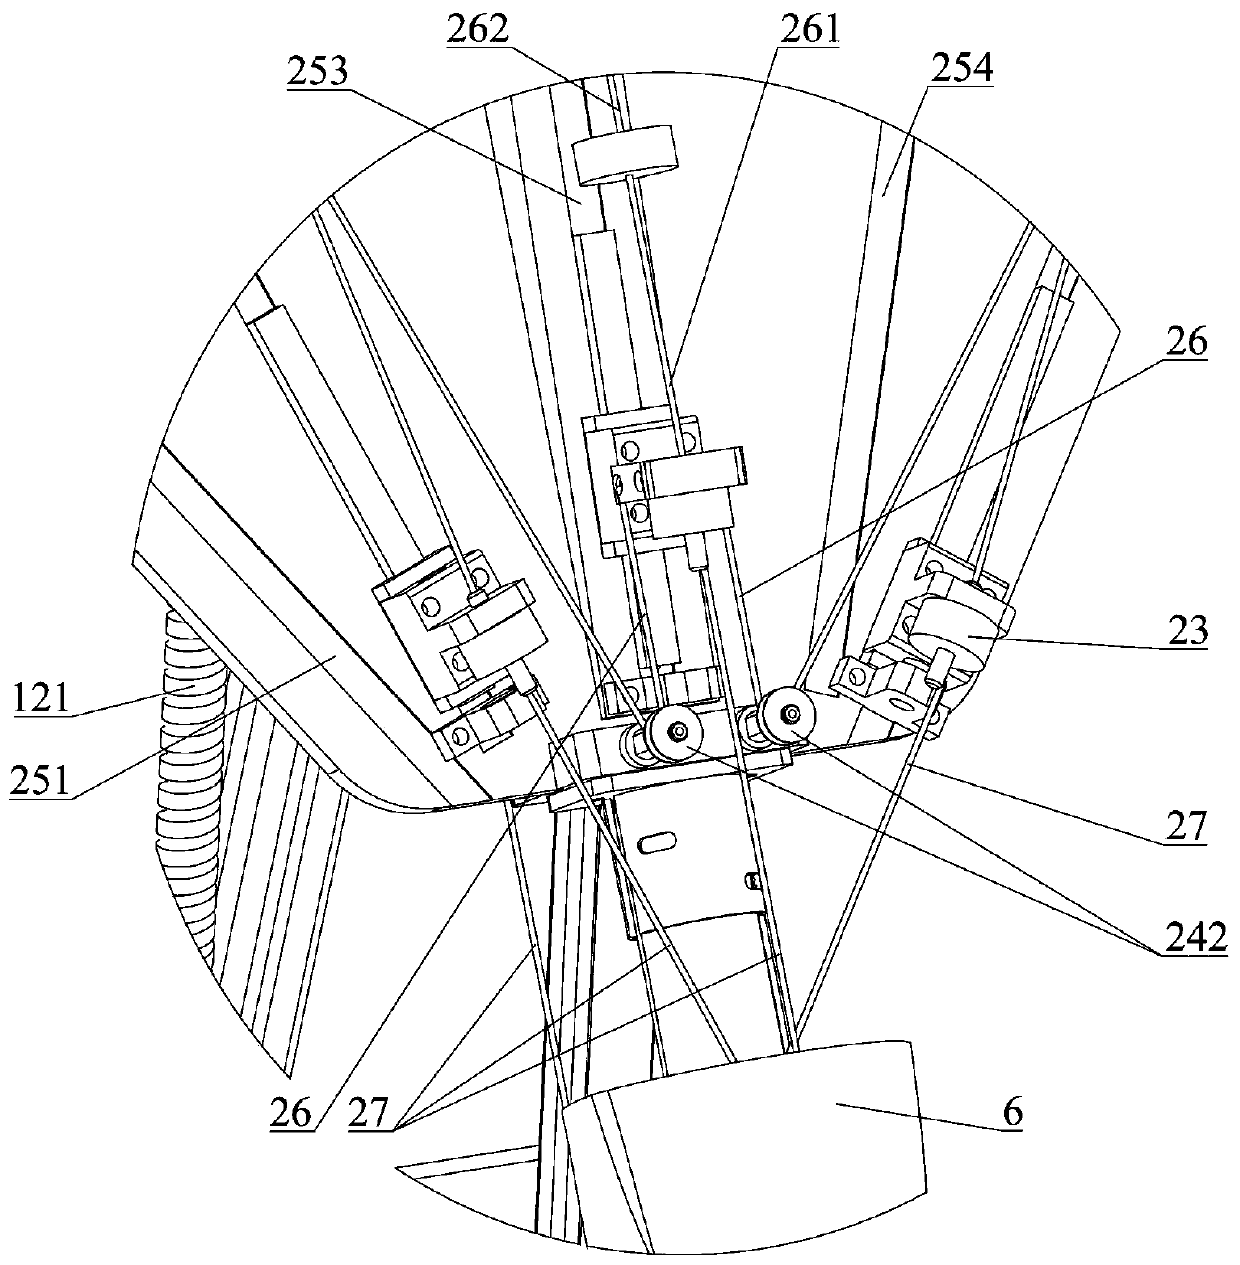 Knee joint dynamic simulation device